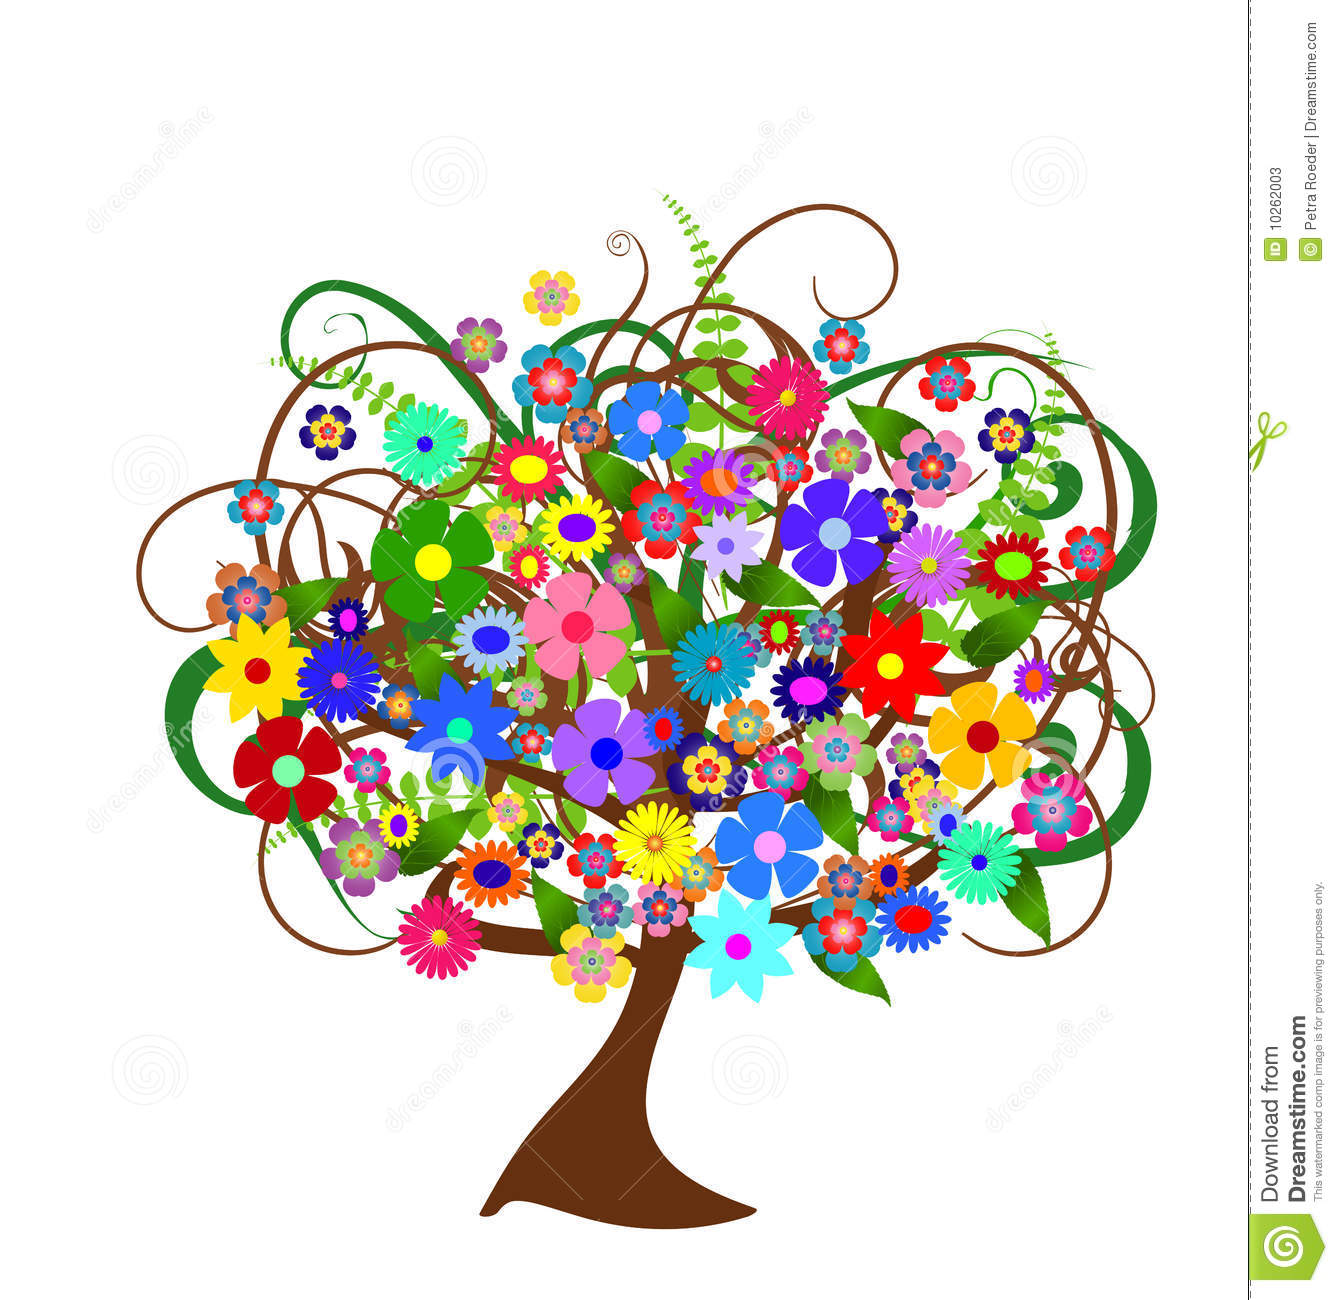 Flower tree clipart - Clipground